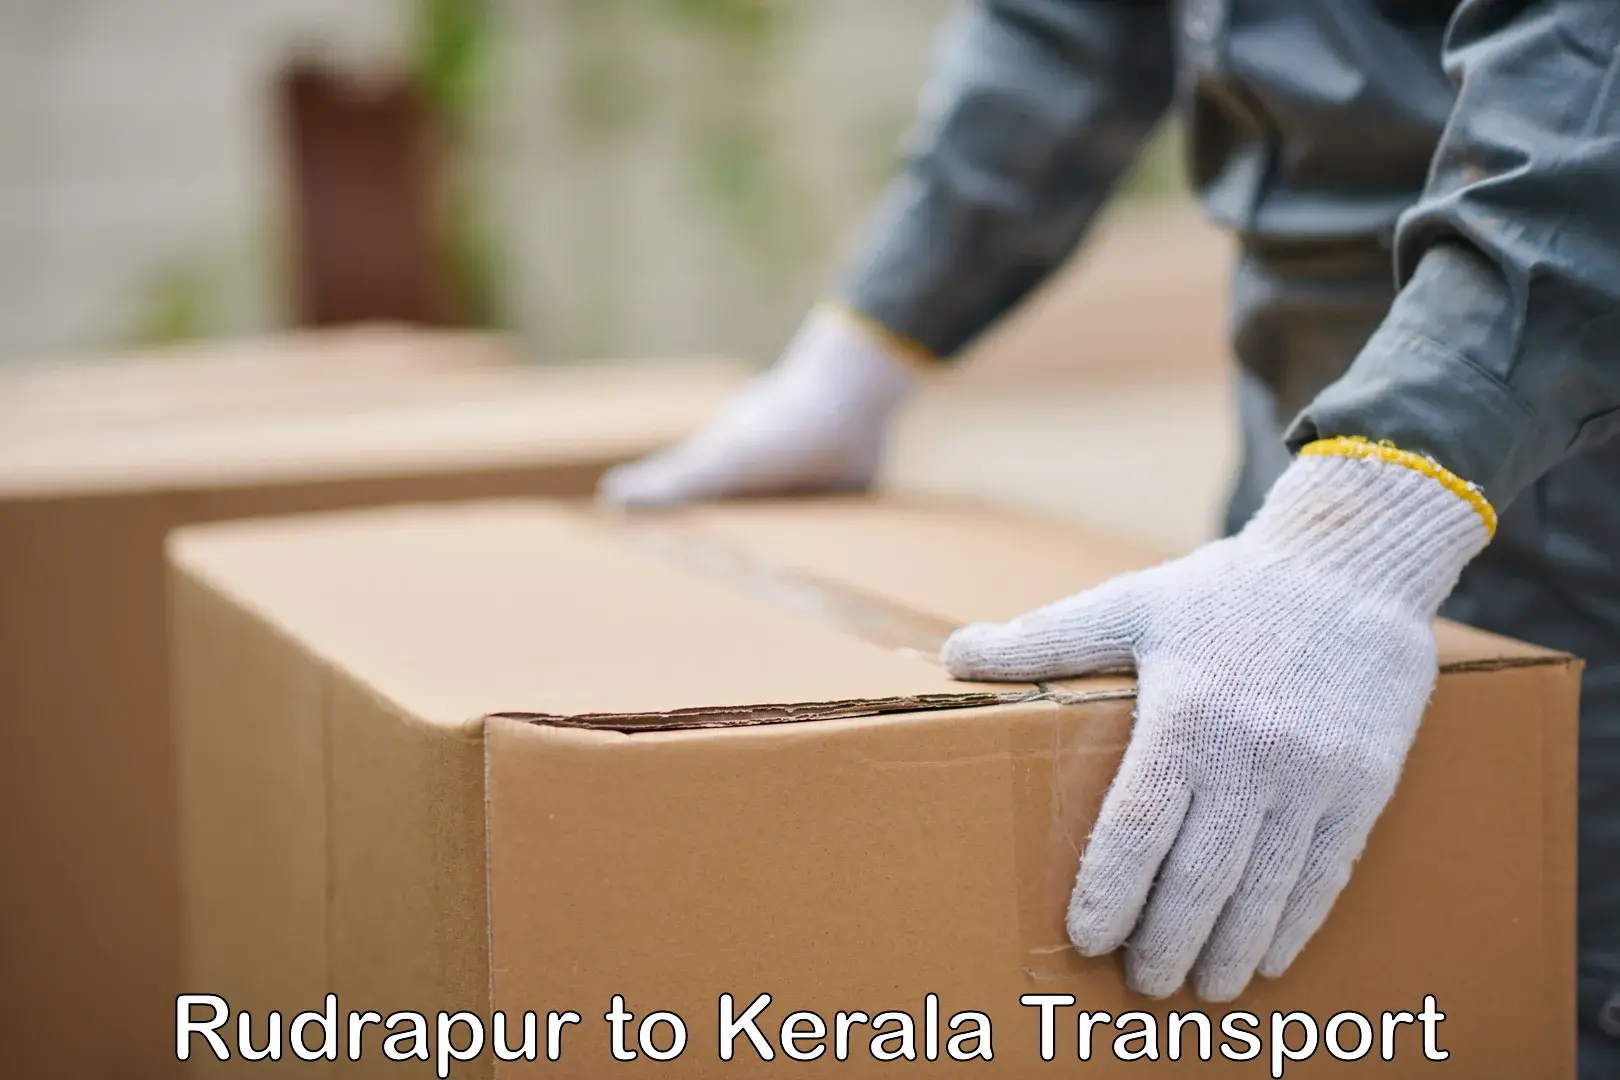 Nearby transport service Rudrapur to Kerala